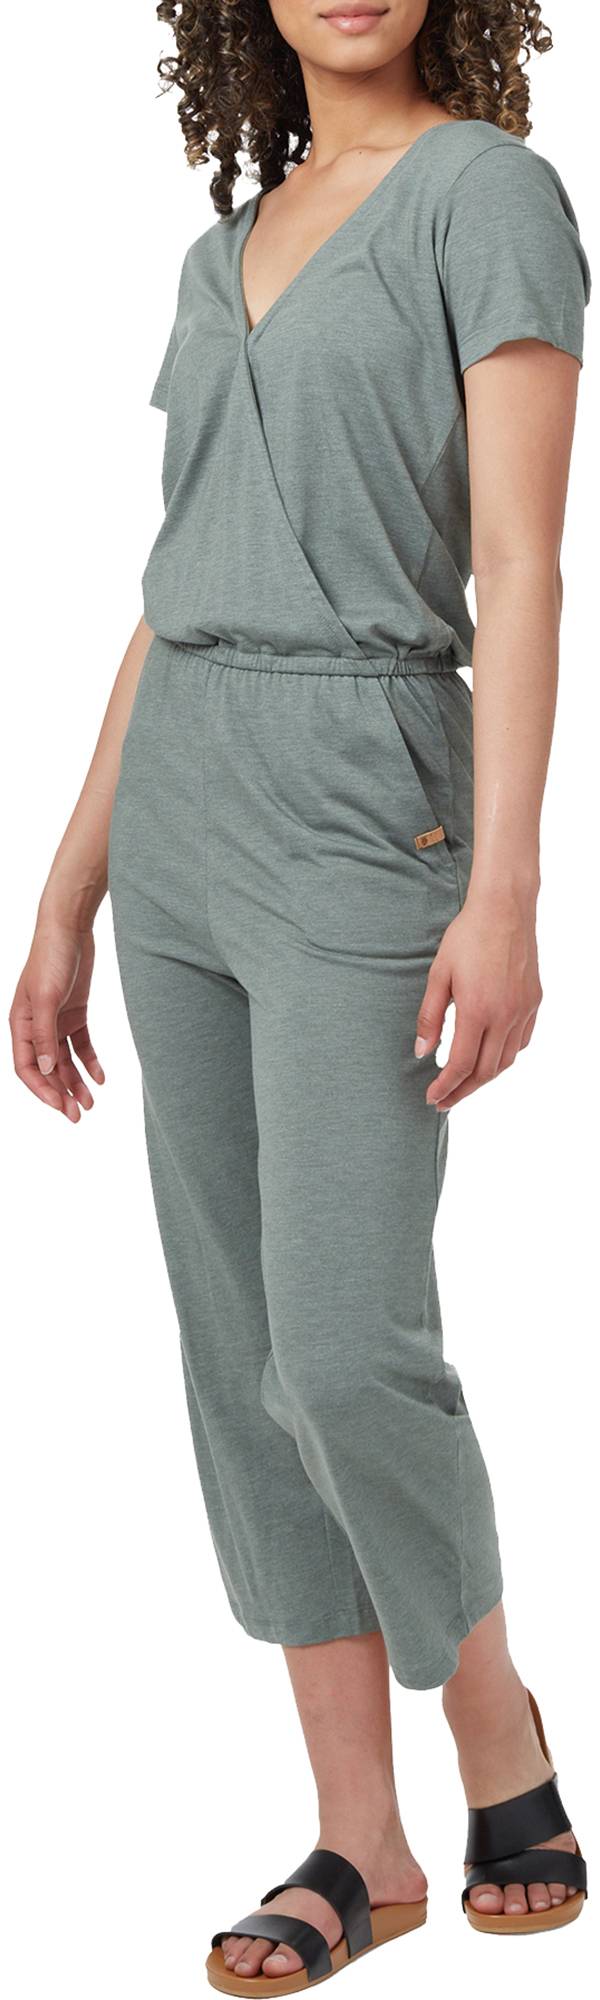 tentree Women's Blakely Shortsleeve Knit Jumpsuit product image